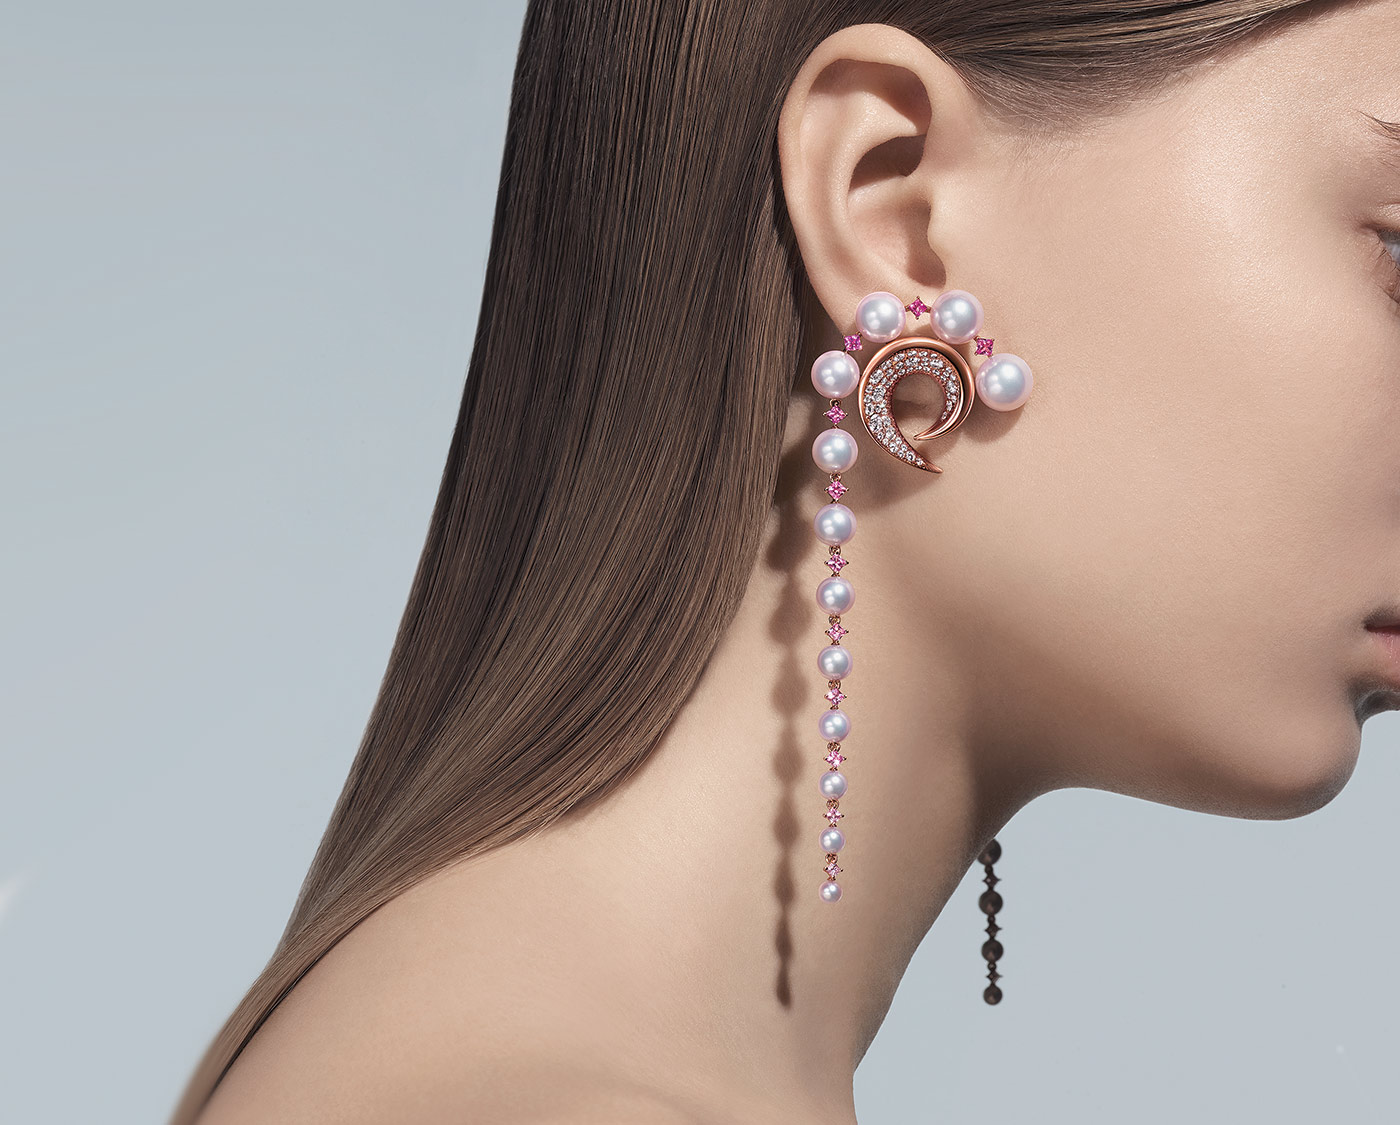 TASAKI Atelier 'Cove' earrings from the 'Surrealism' collection with diamonds, pink sapphires and Akoya pearls in SAKURAGOLD(TM)